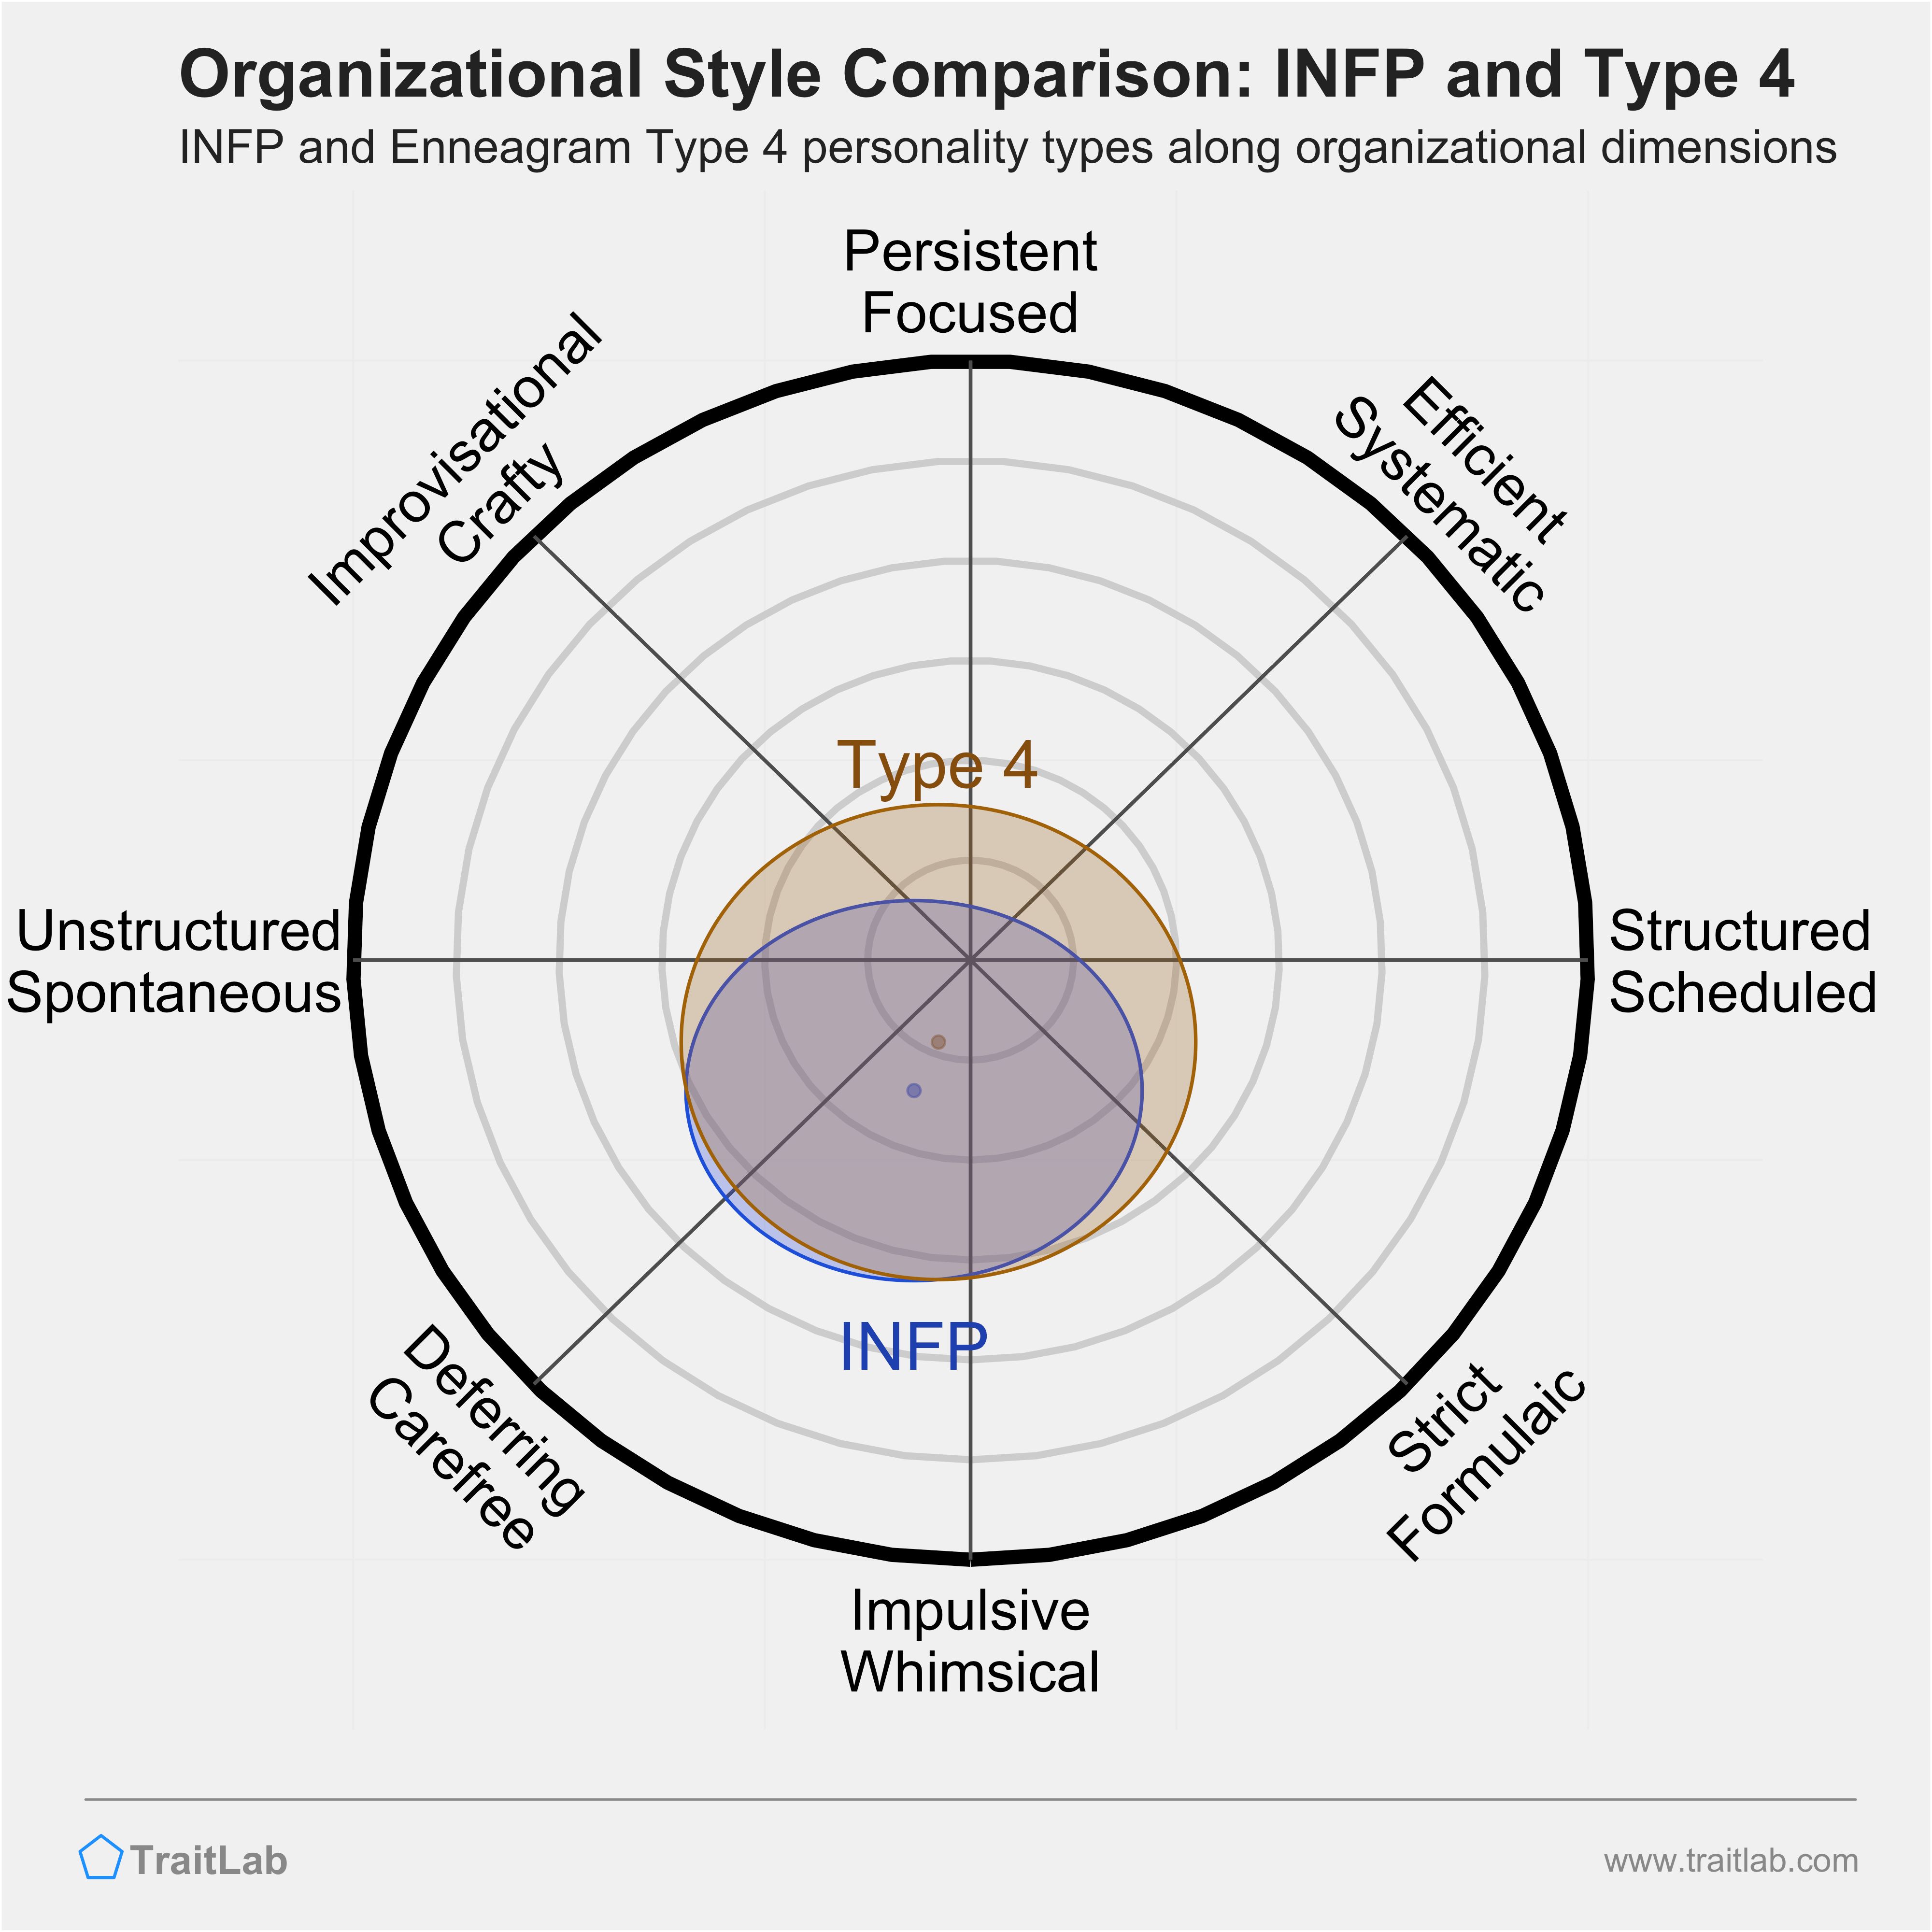 INFP and Type 4 comparison across organizational dimensions